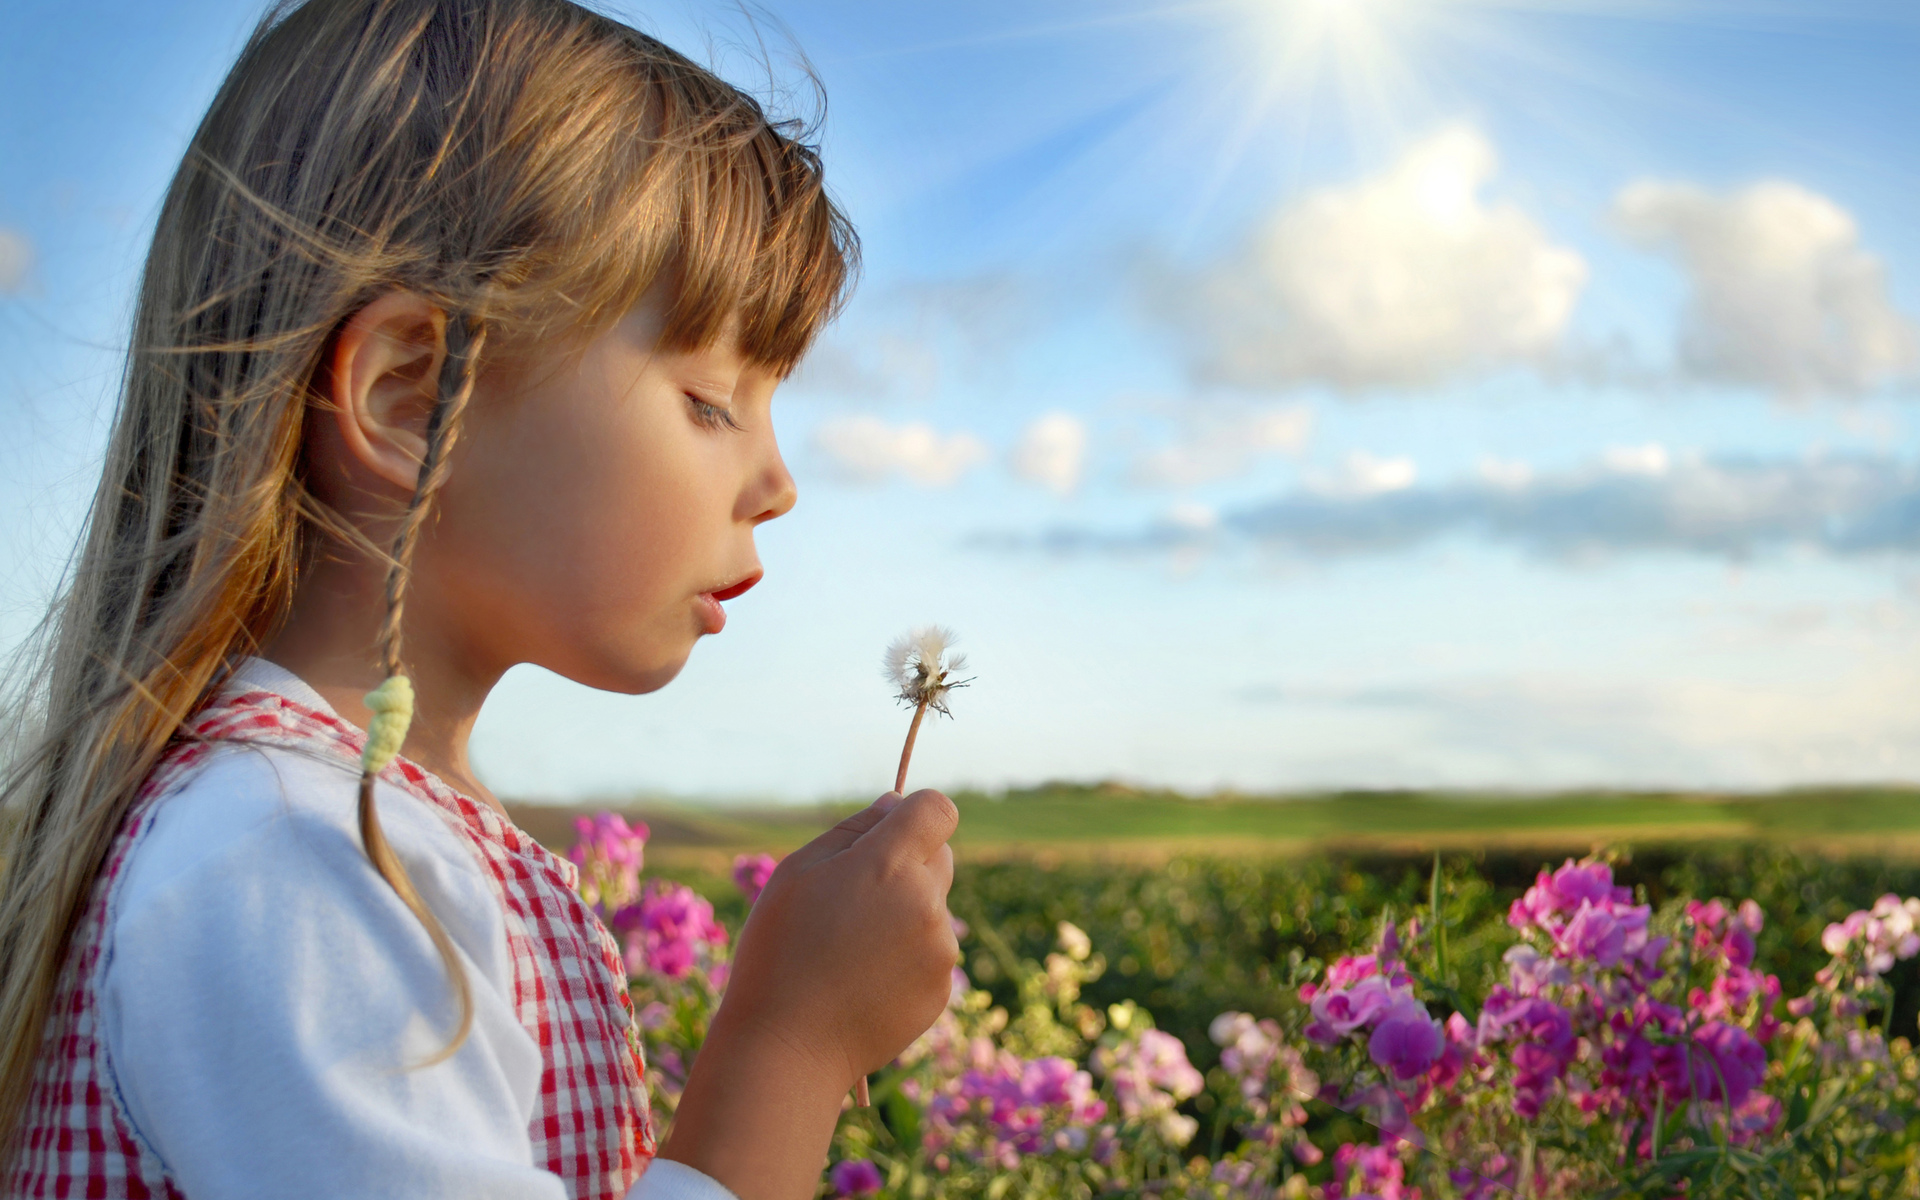 little girl wallpaper,people in nature,child,spring,beauty,meadow